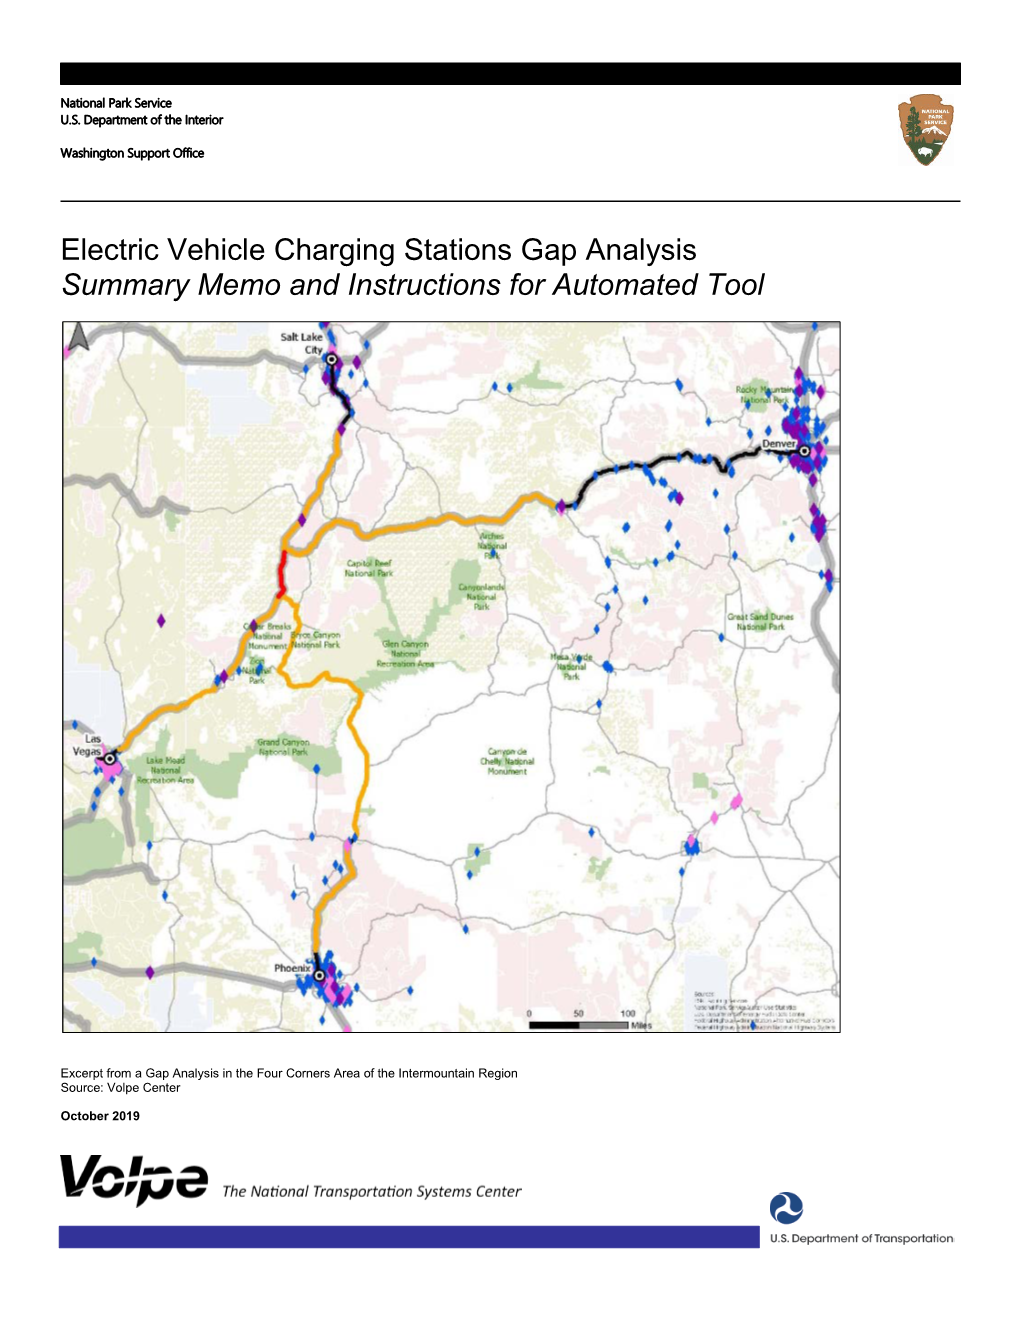 Electric Vehicle Charging Stations Gap Analysis Summary Memo and Instructions for Automated Tool